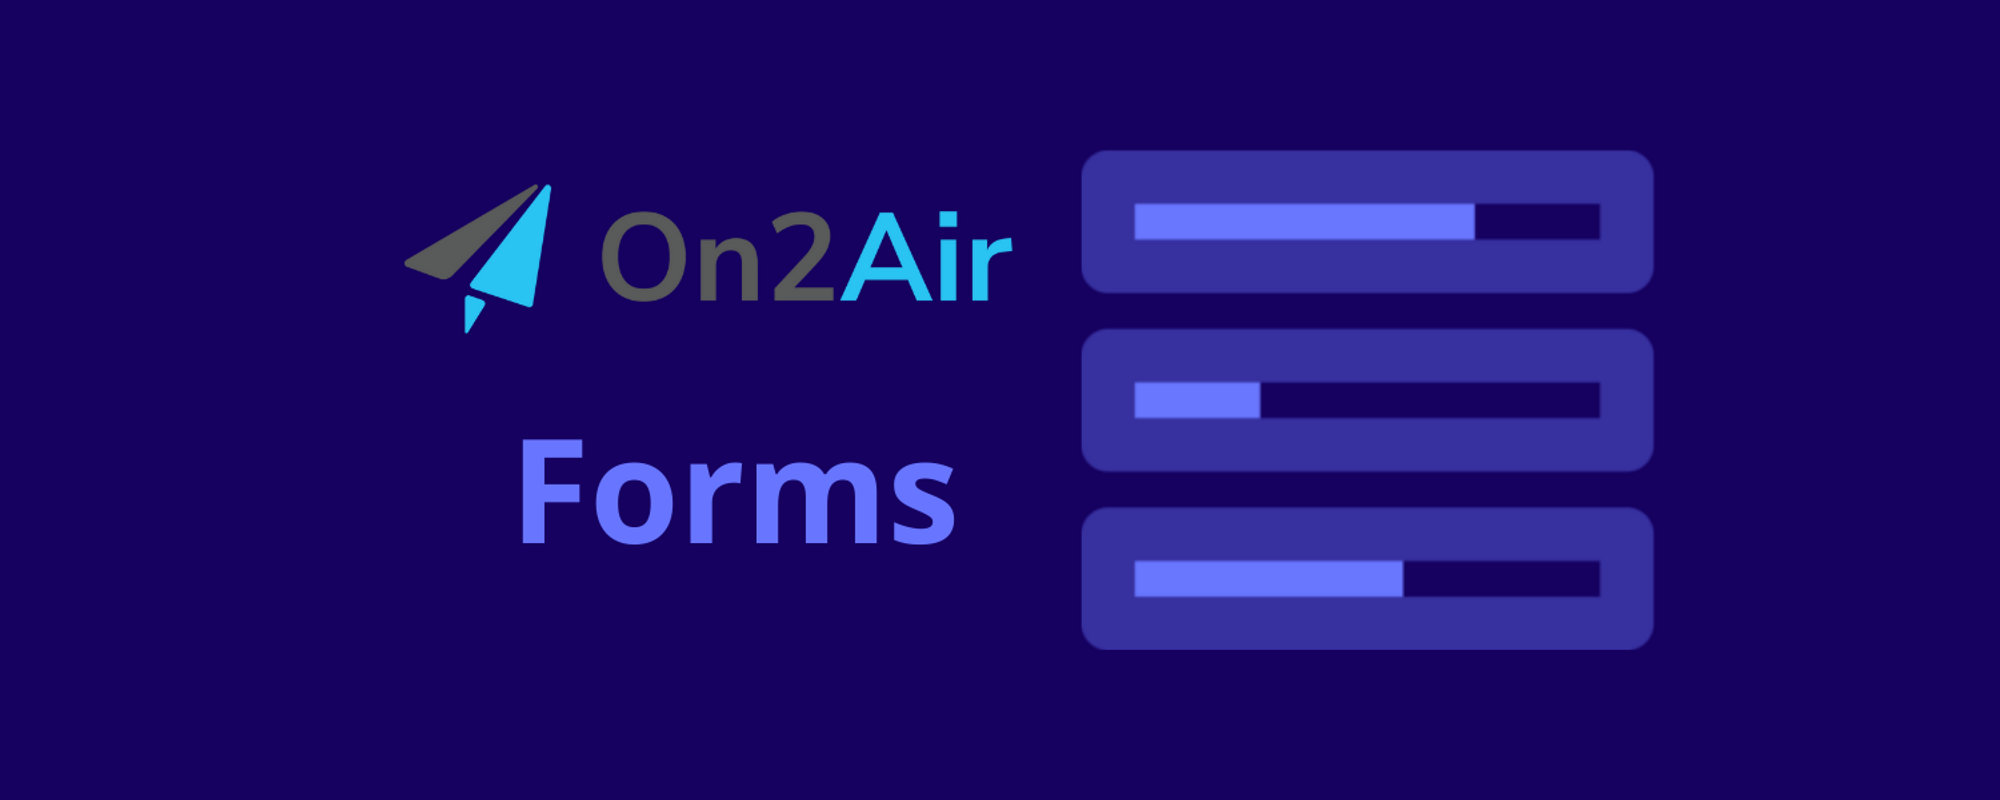 On2Air Forms